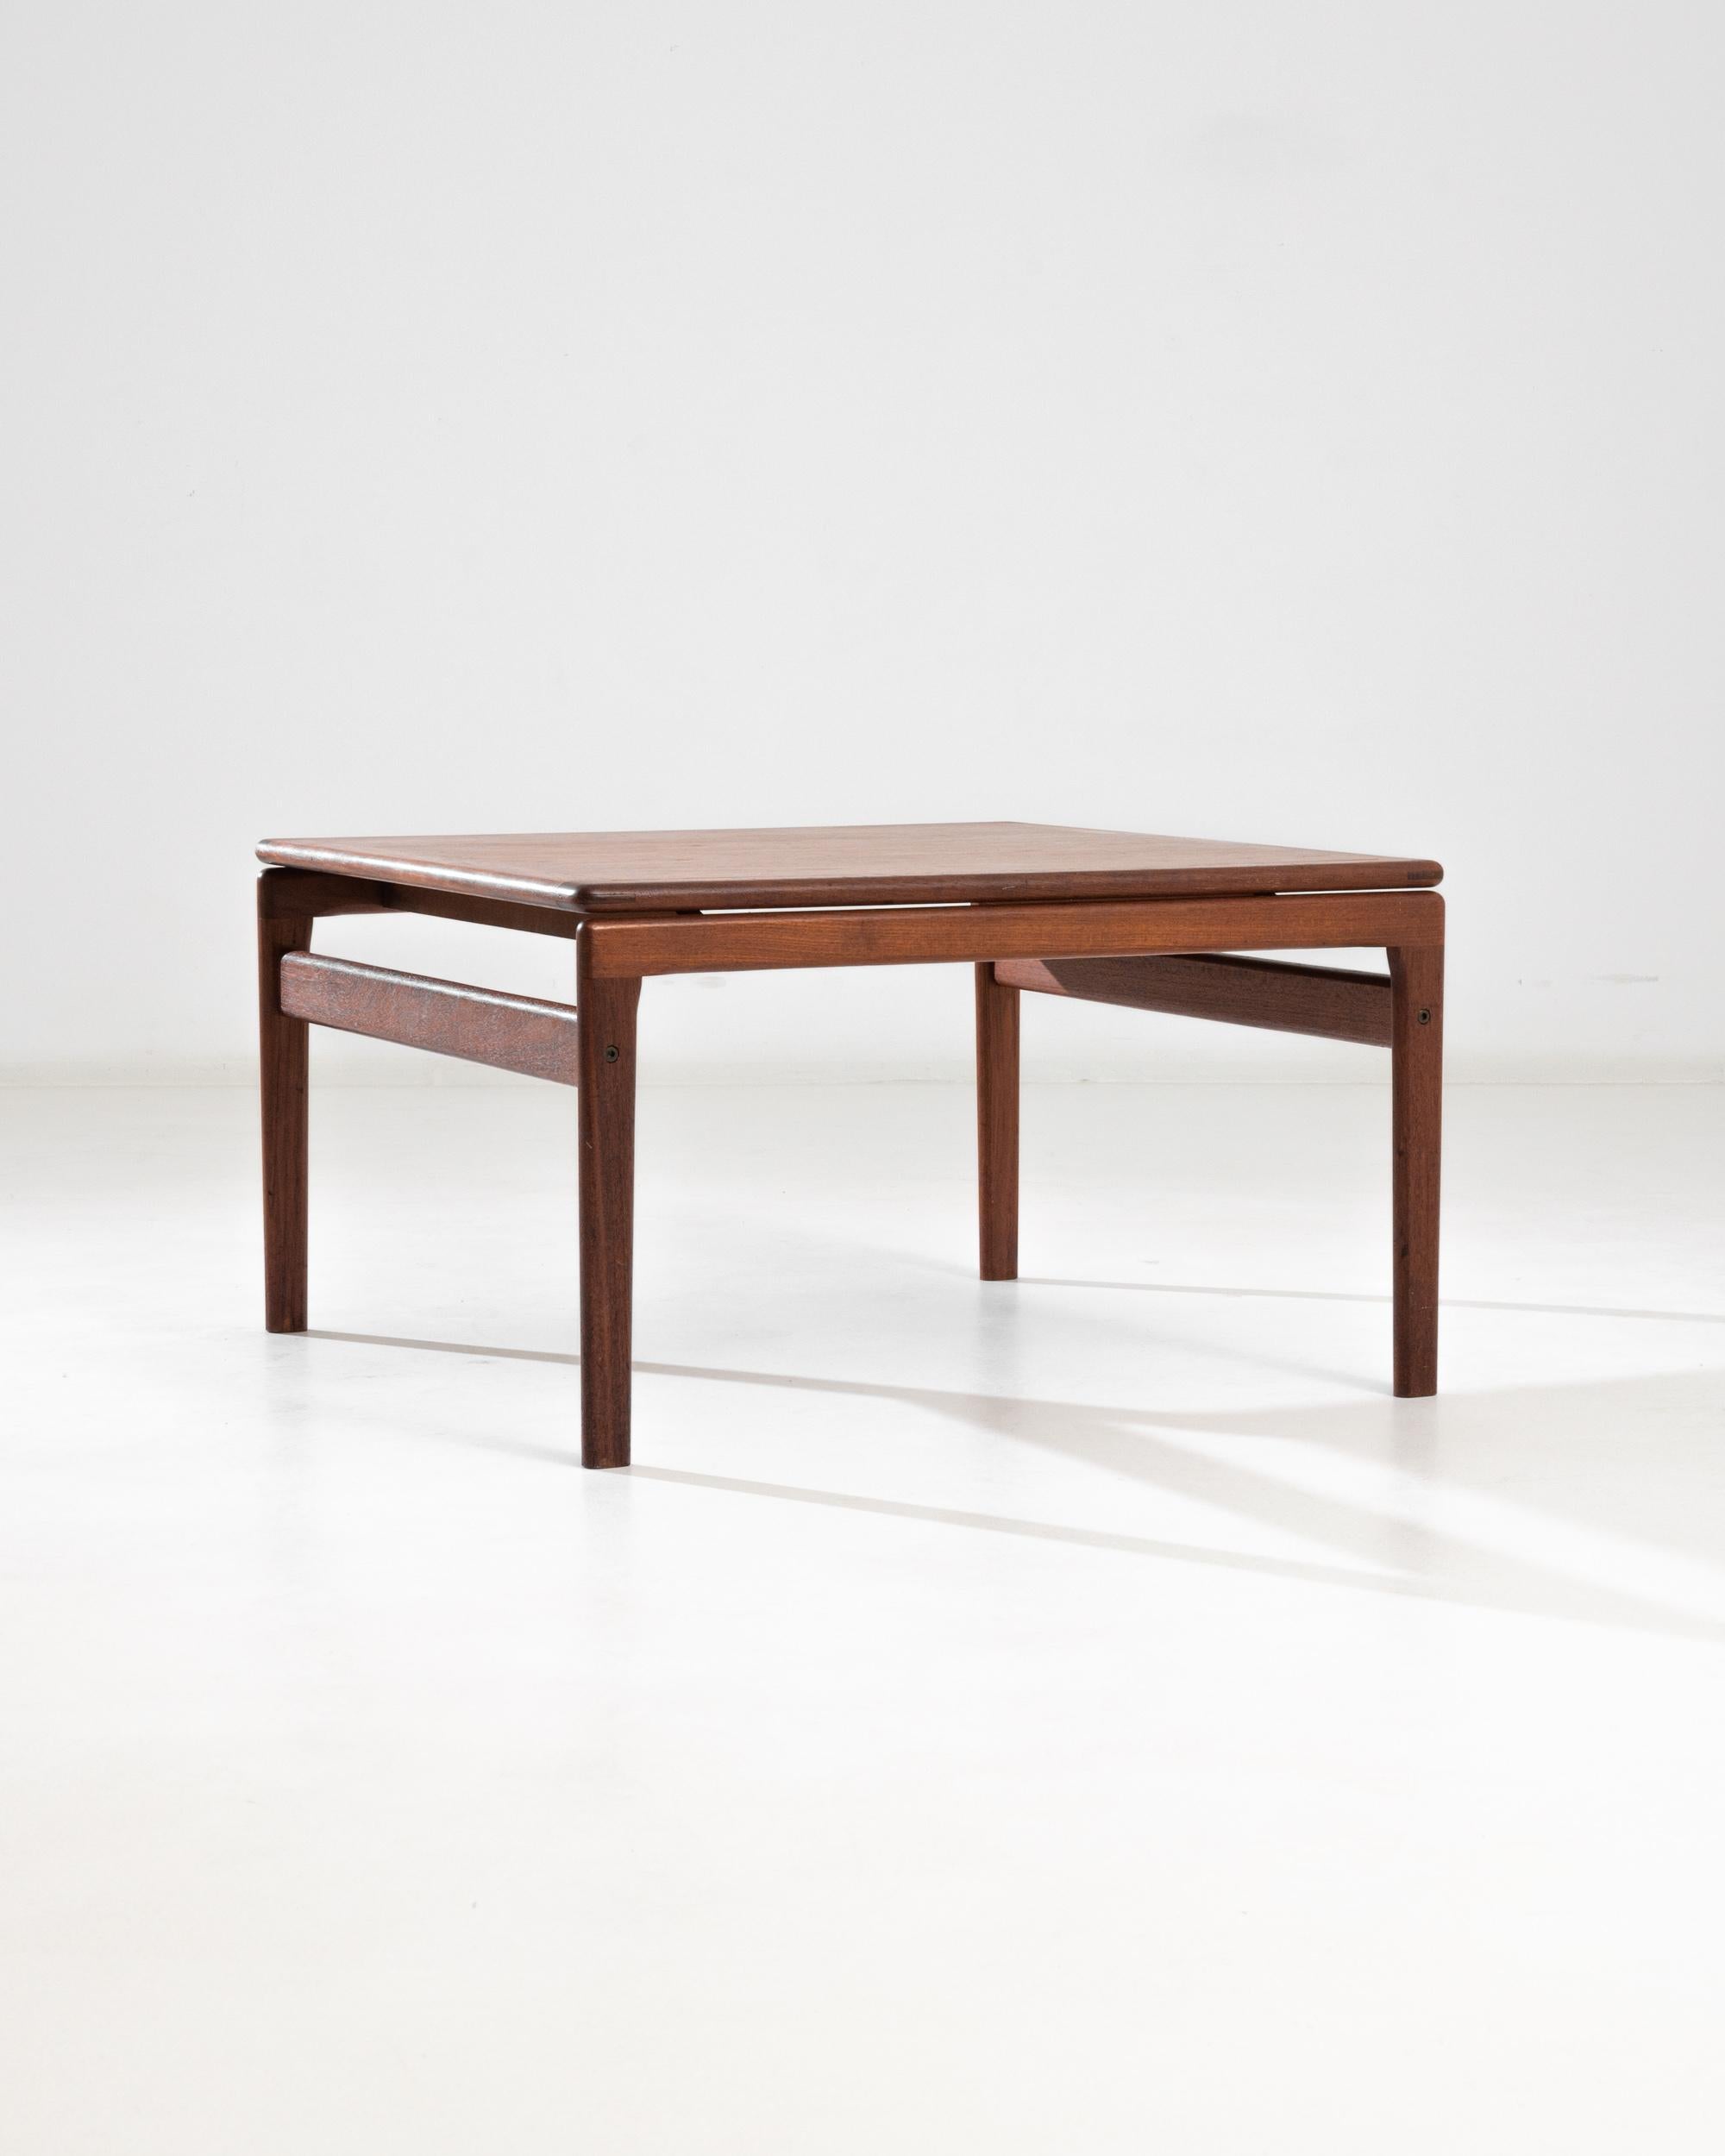 A mid-century wooden coffee table from Denmark. With half-lap corner joints, subtly tapered legs, and floating table top, this side table is a fine example of understated yet exquisite Danish furniture-making. Its minimalistic design and gleaming